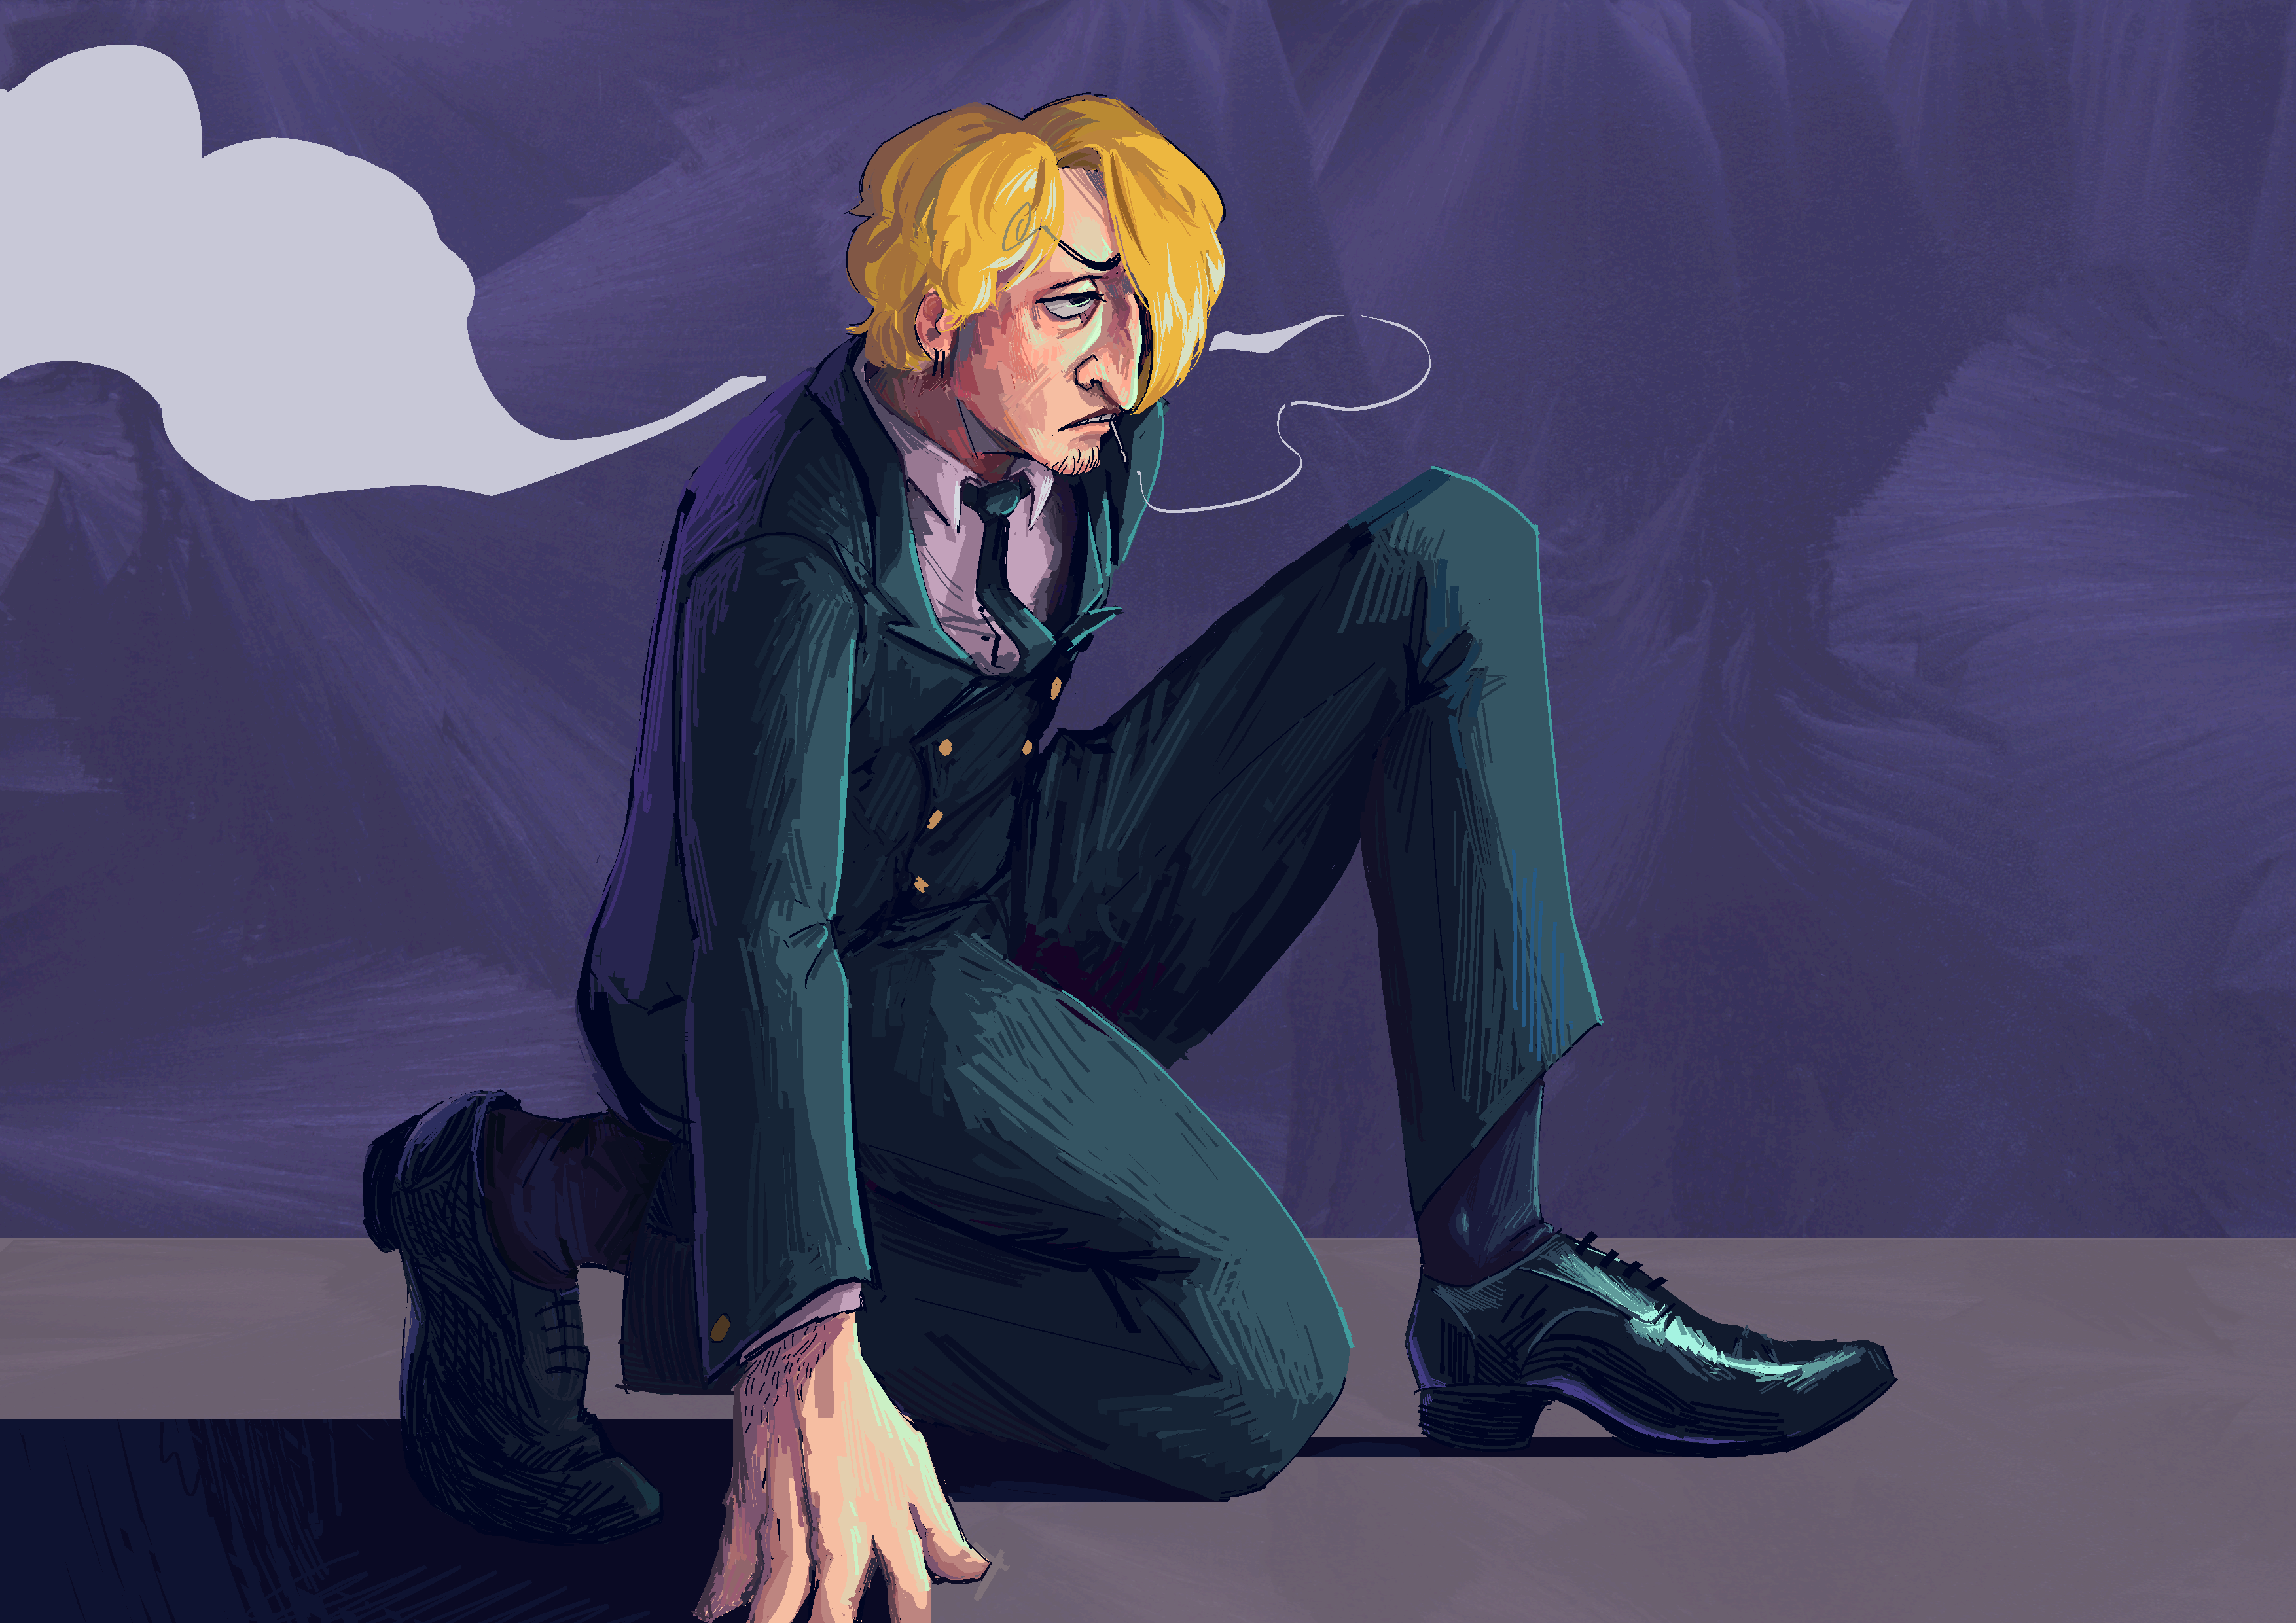 A digital painting of Sanji from One Piece. He's crouched down, one foot planted on the ground like he's about to launch back up. He's painted a bit roughly, with hard hatching brushstrokes. The colors are largely teals and purples, with his yellow hair contrasting starkly.